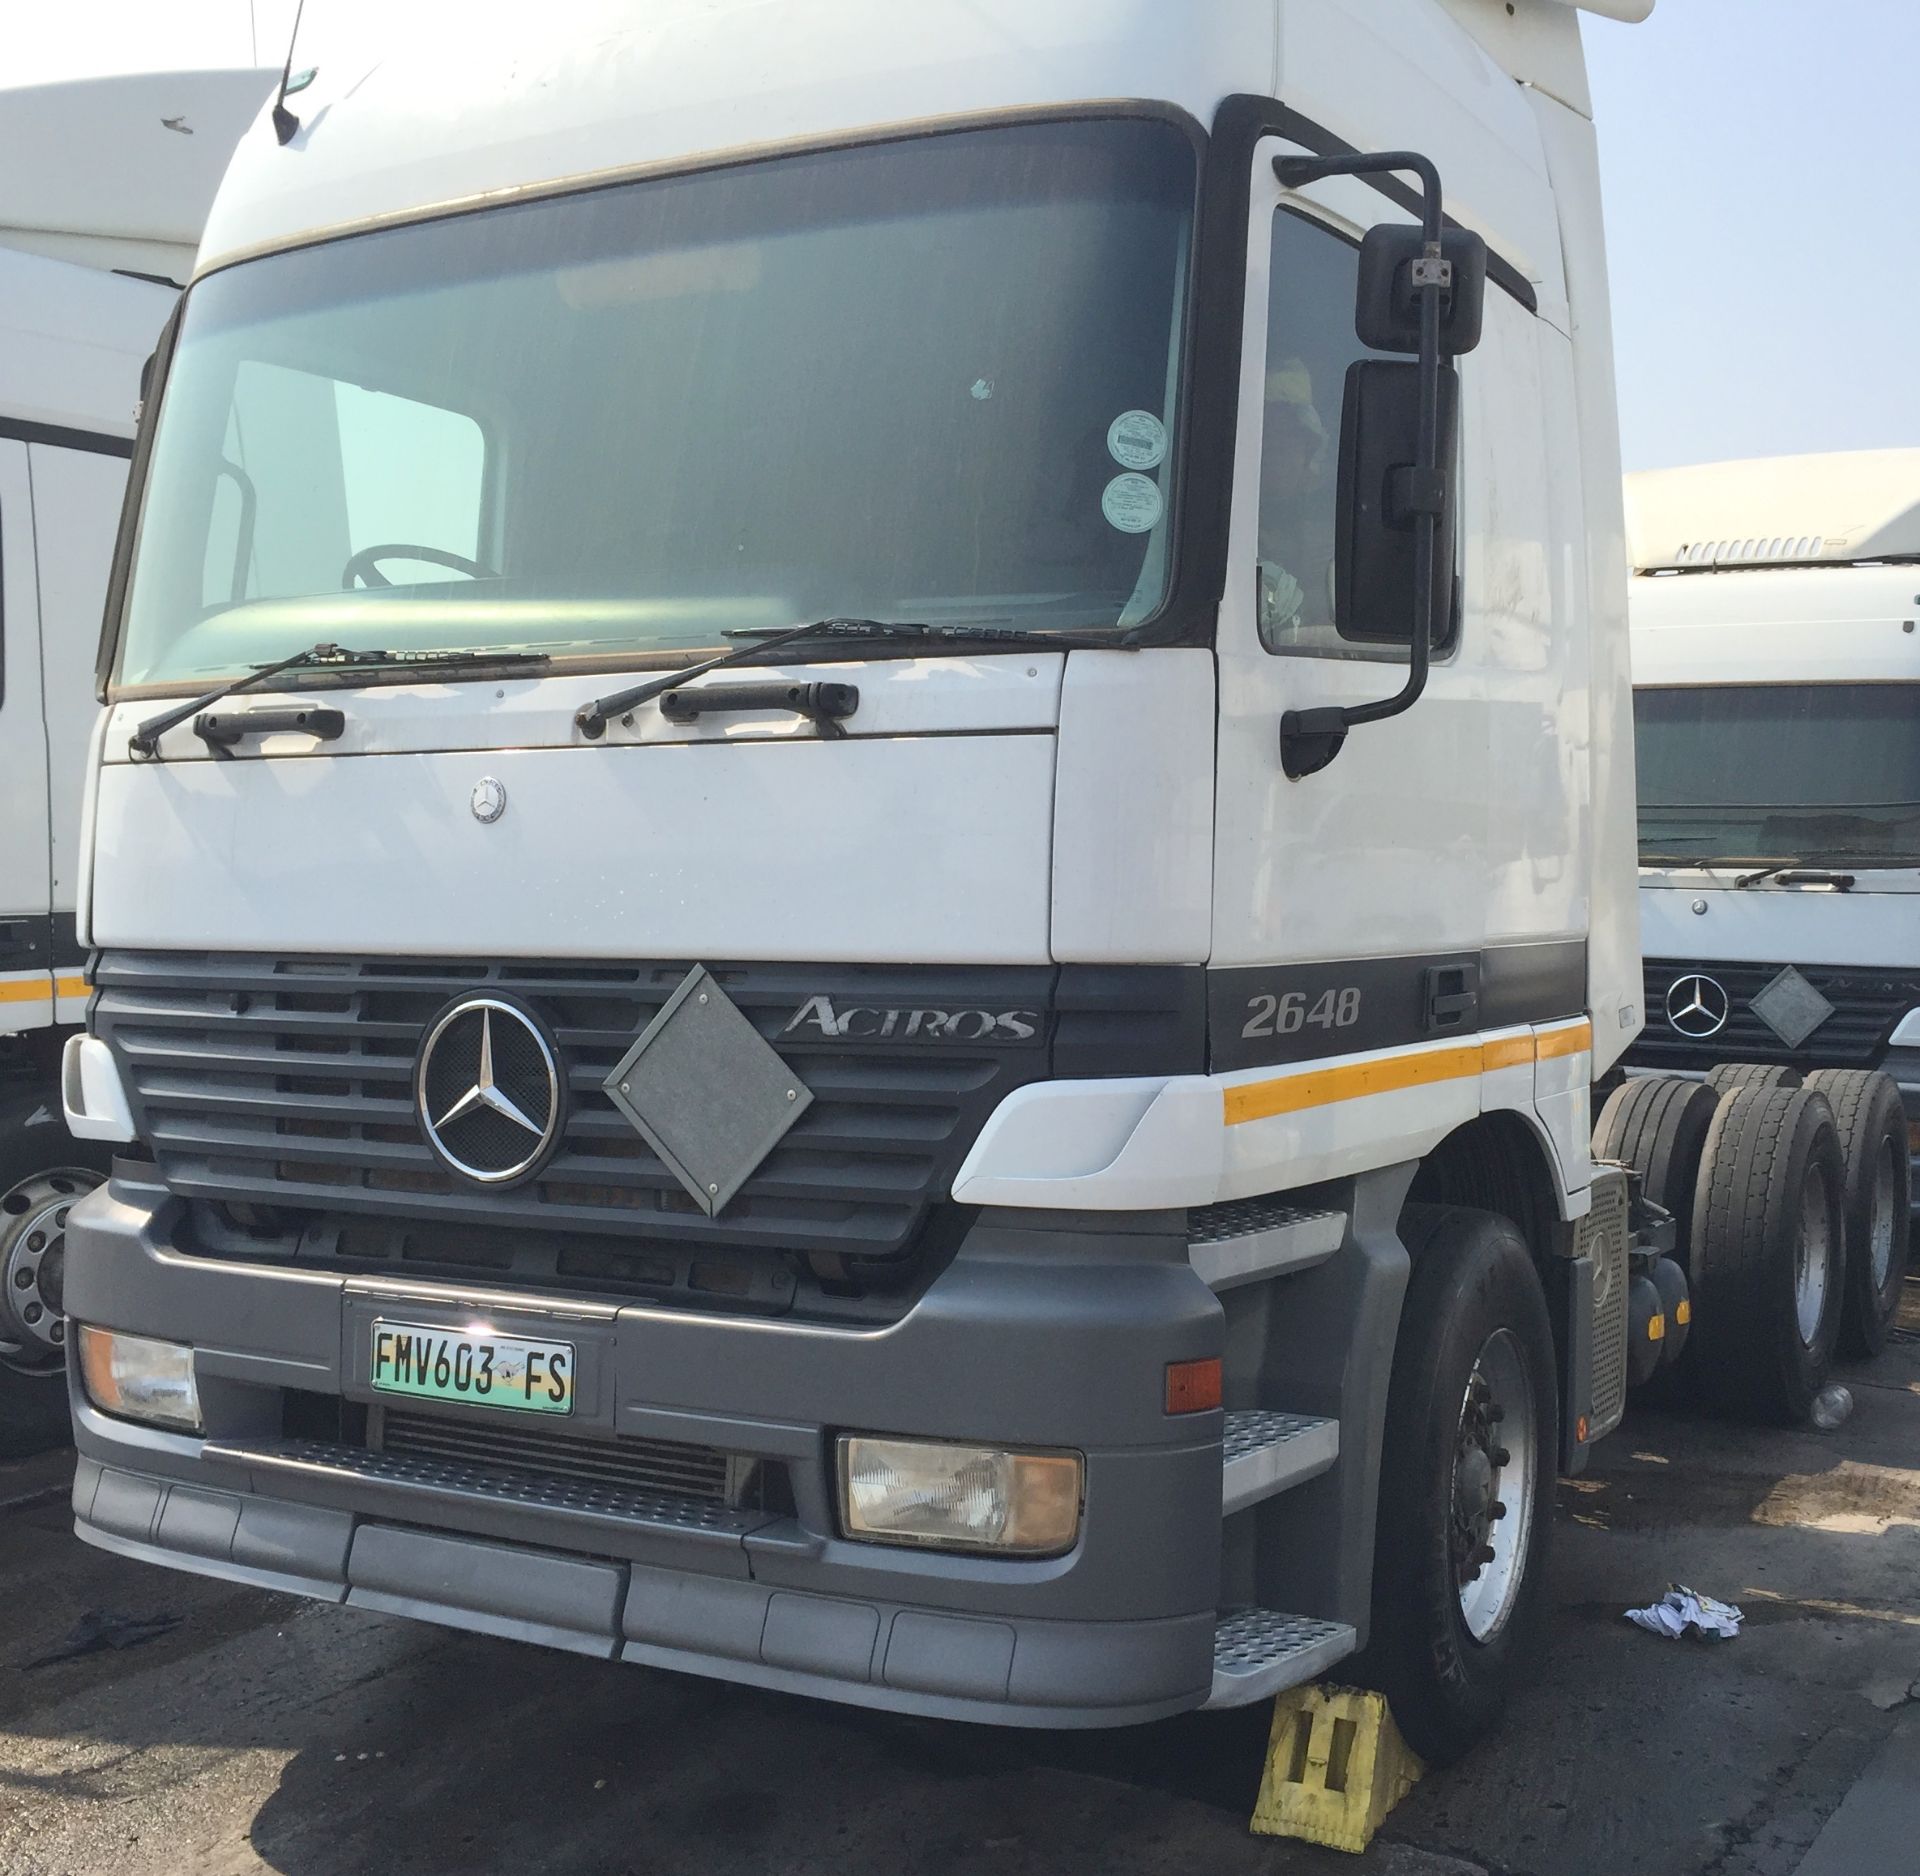 2003 M/BENZ ACTROS 2648 6X4 T/T - REG NO: FMV603FS - (ITEM TO BE SOLD SUBJECT TO CONFIRMATION)